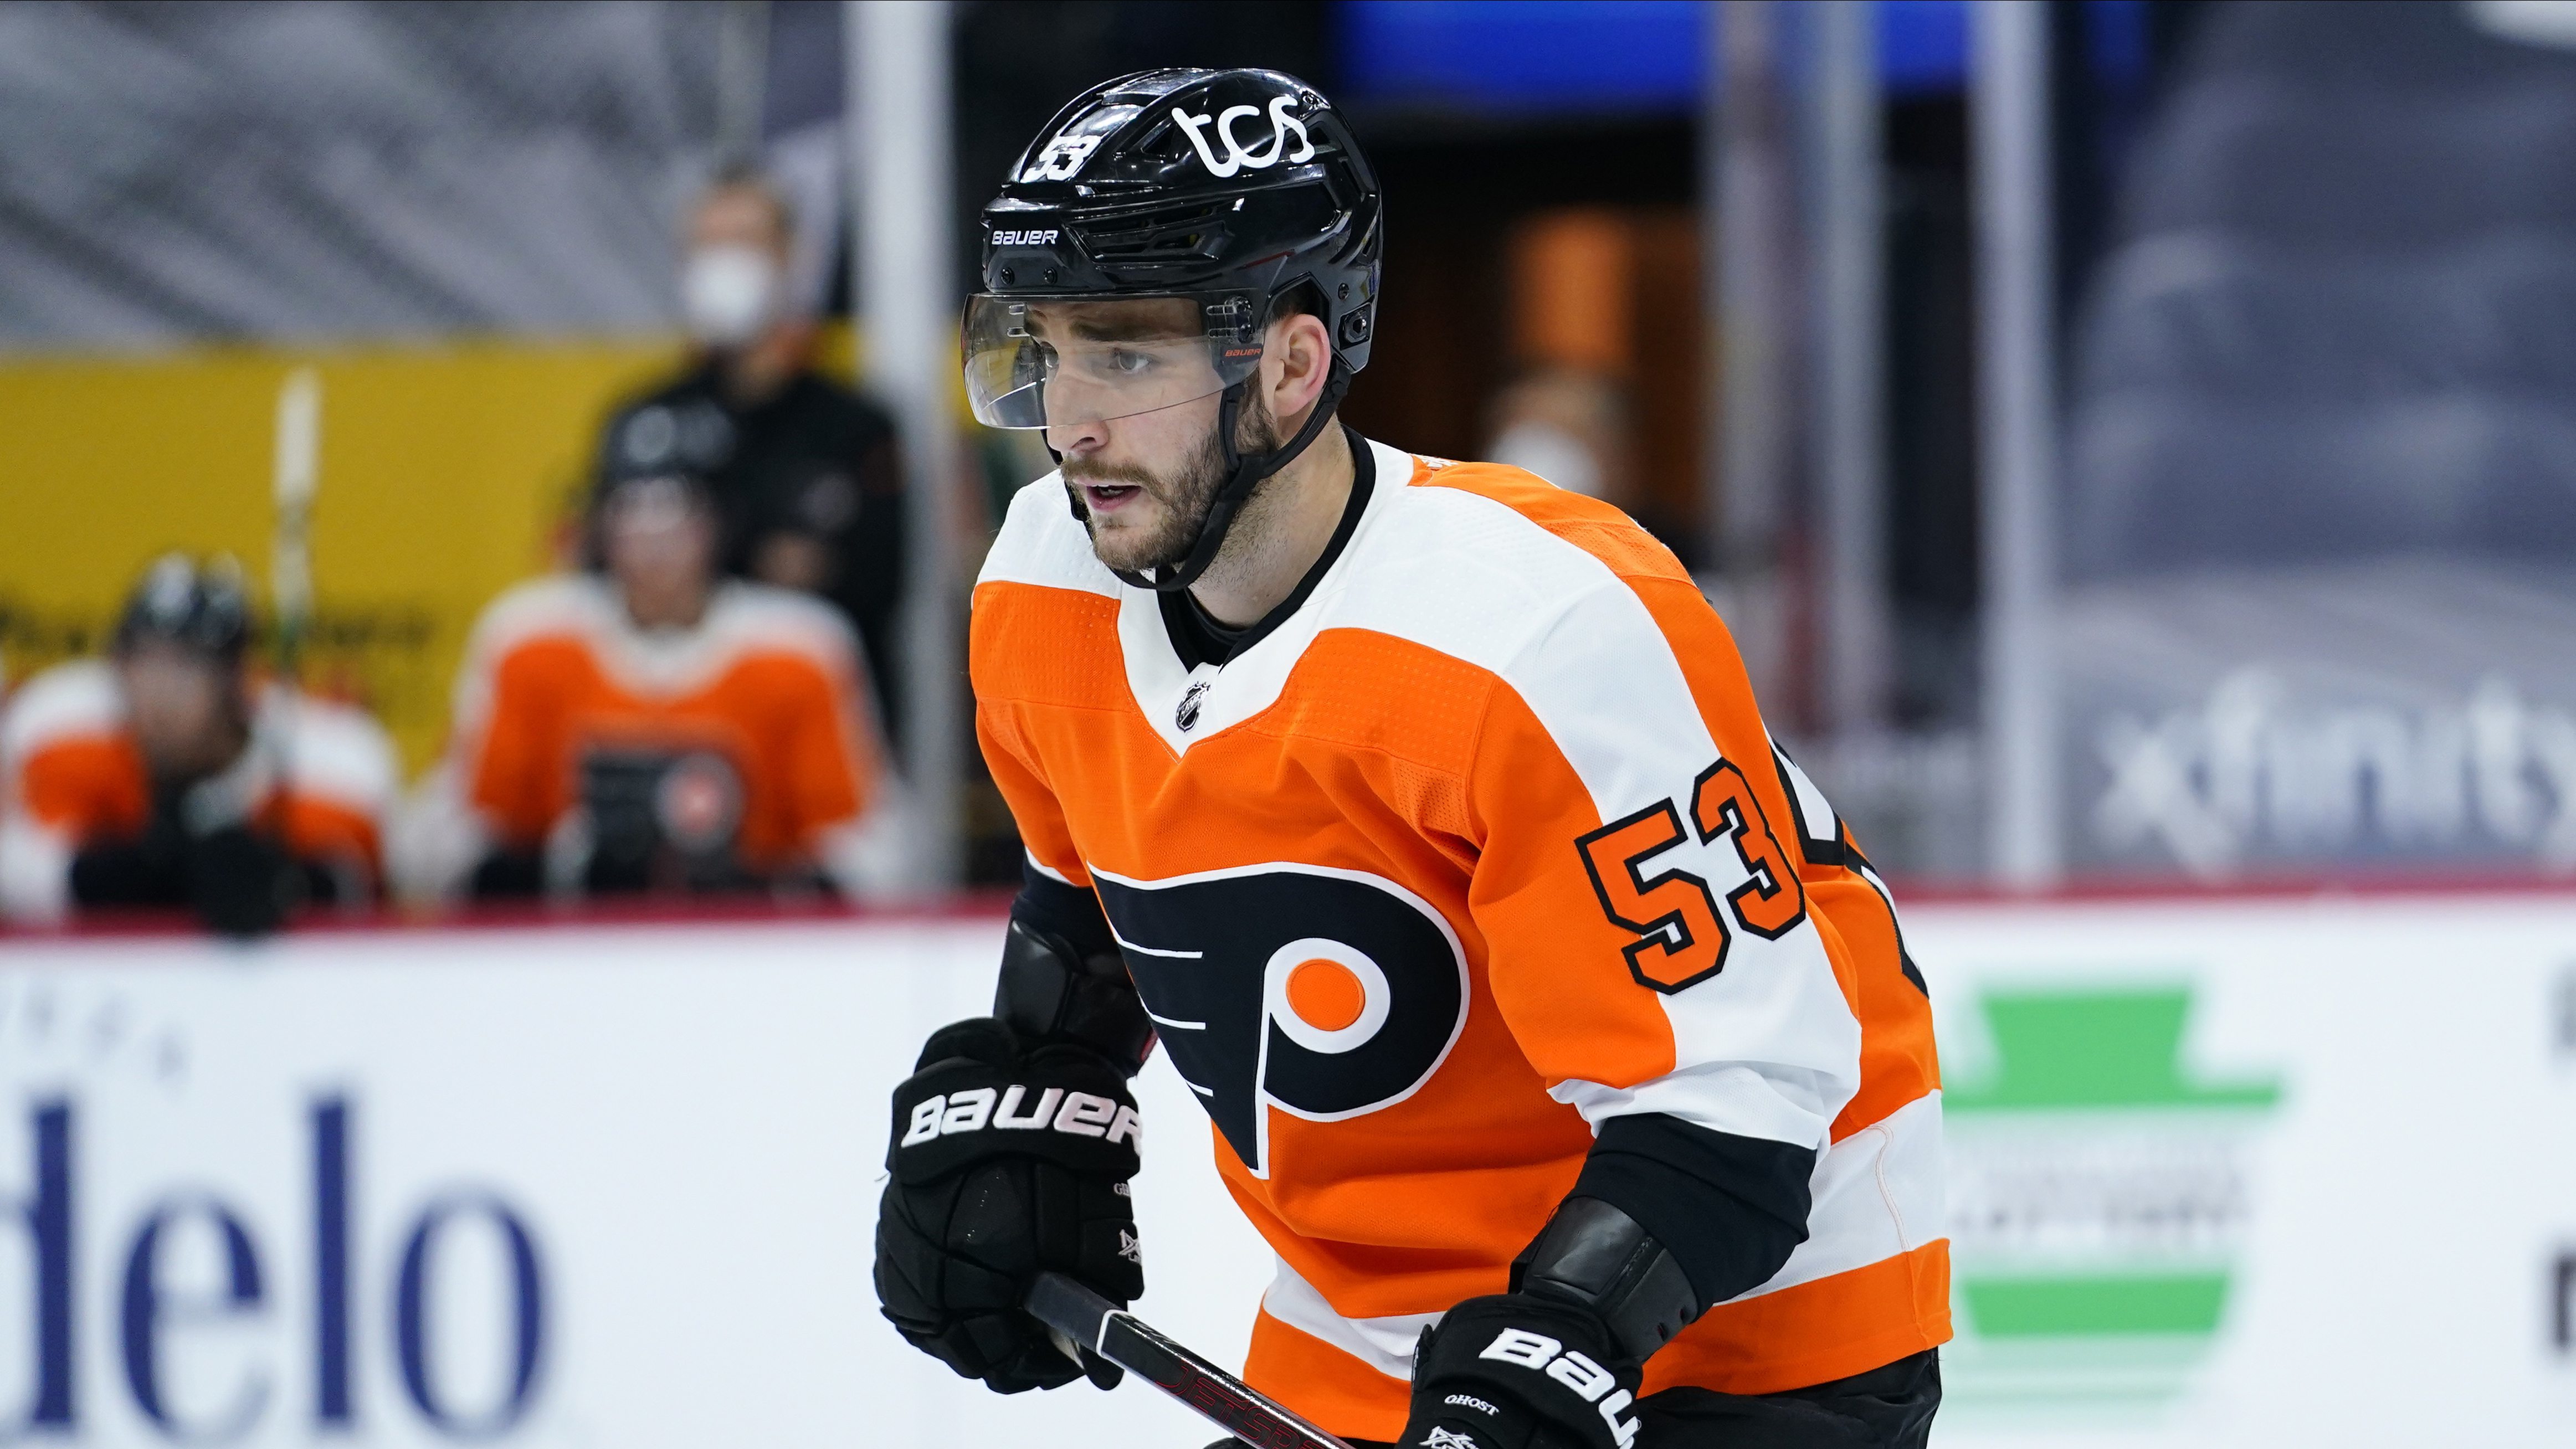 Fish: Shayne Gostisbehere might not be in Flyers' regular lineup